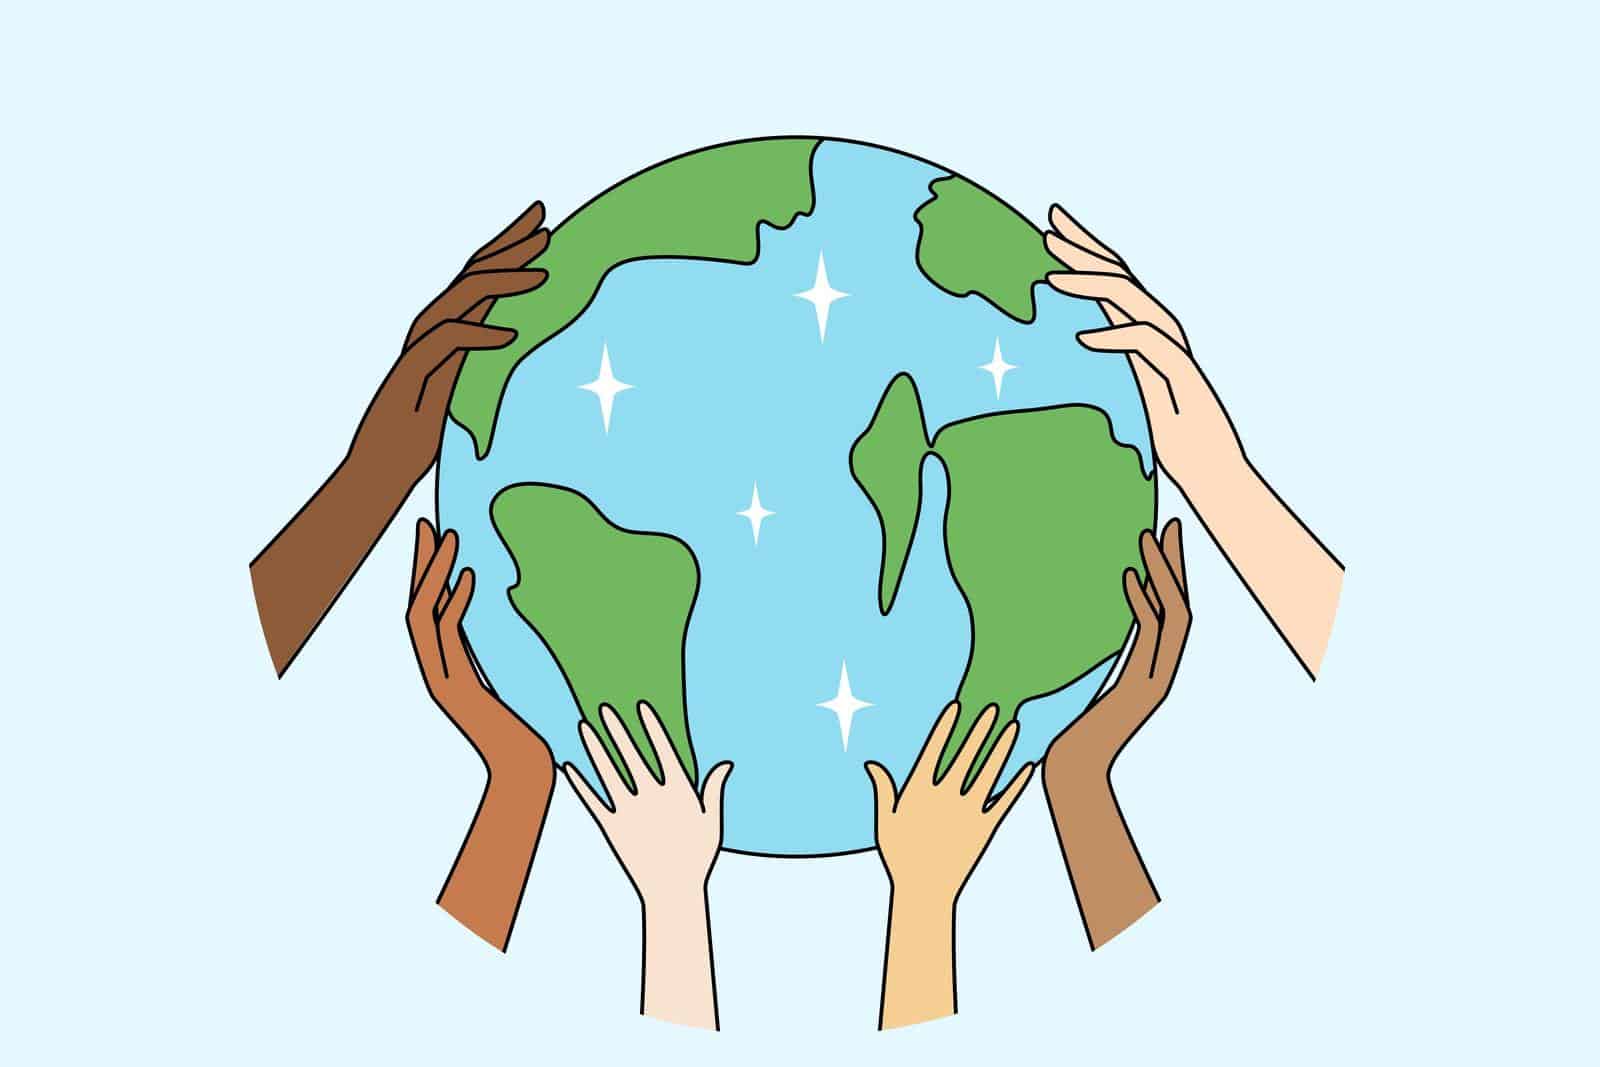 people-hands-holding-planet-earth